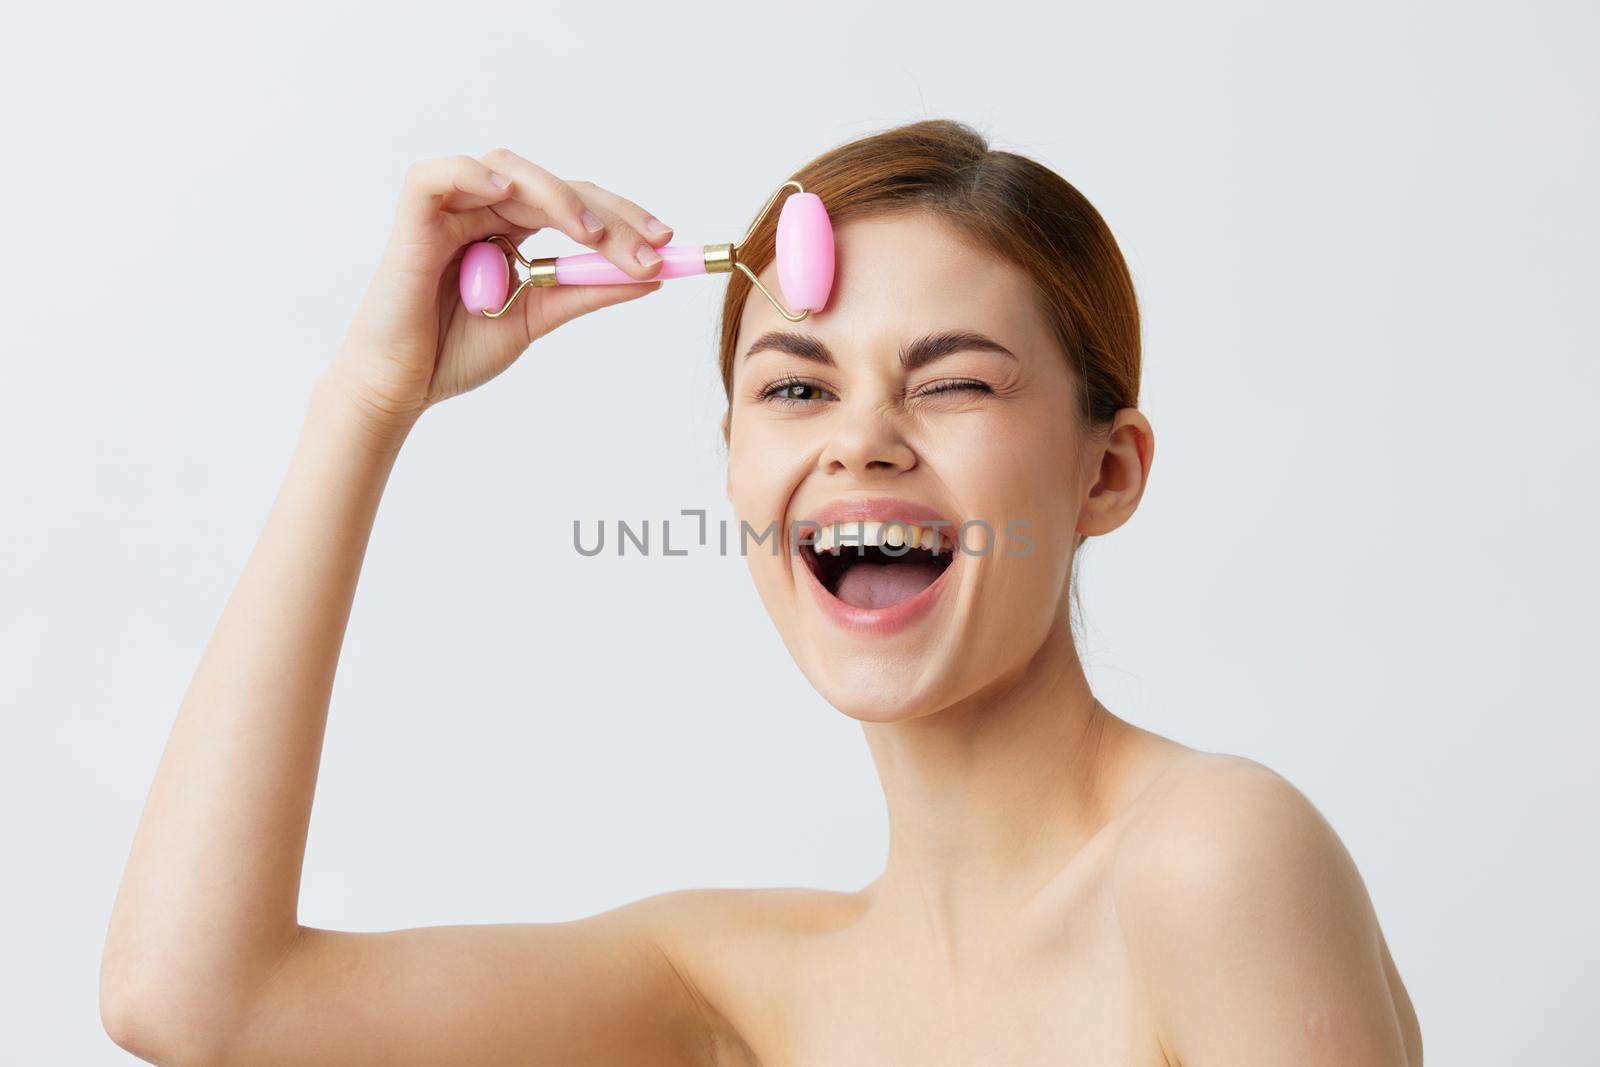 woman massage roller anti aging facial treatment light background. High quality photo